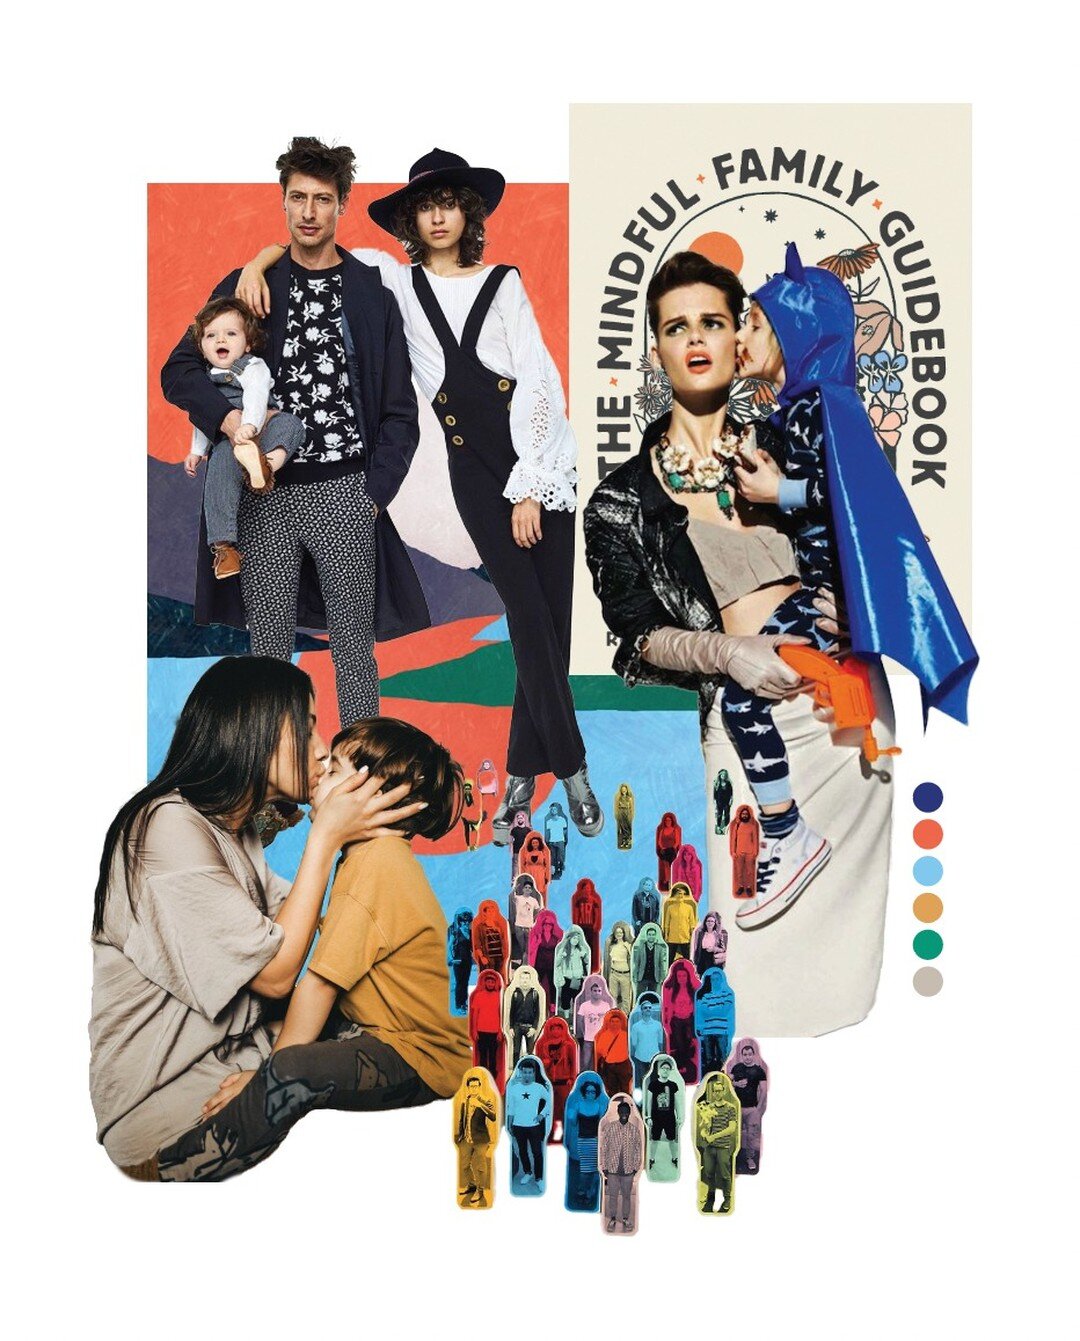 Fam Bam - a vision board. I put together this projection of realistic hope for my family life (are you supposed to shoot for &quot;realistic&quot; when vision boarding?) -- the colorful chaos and flavor of love that is balancing calendars, managing e